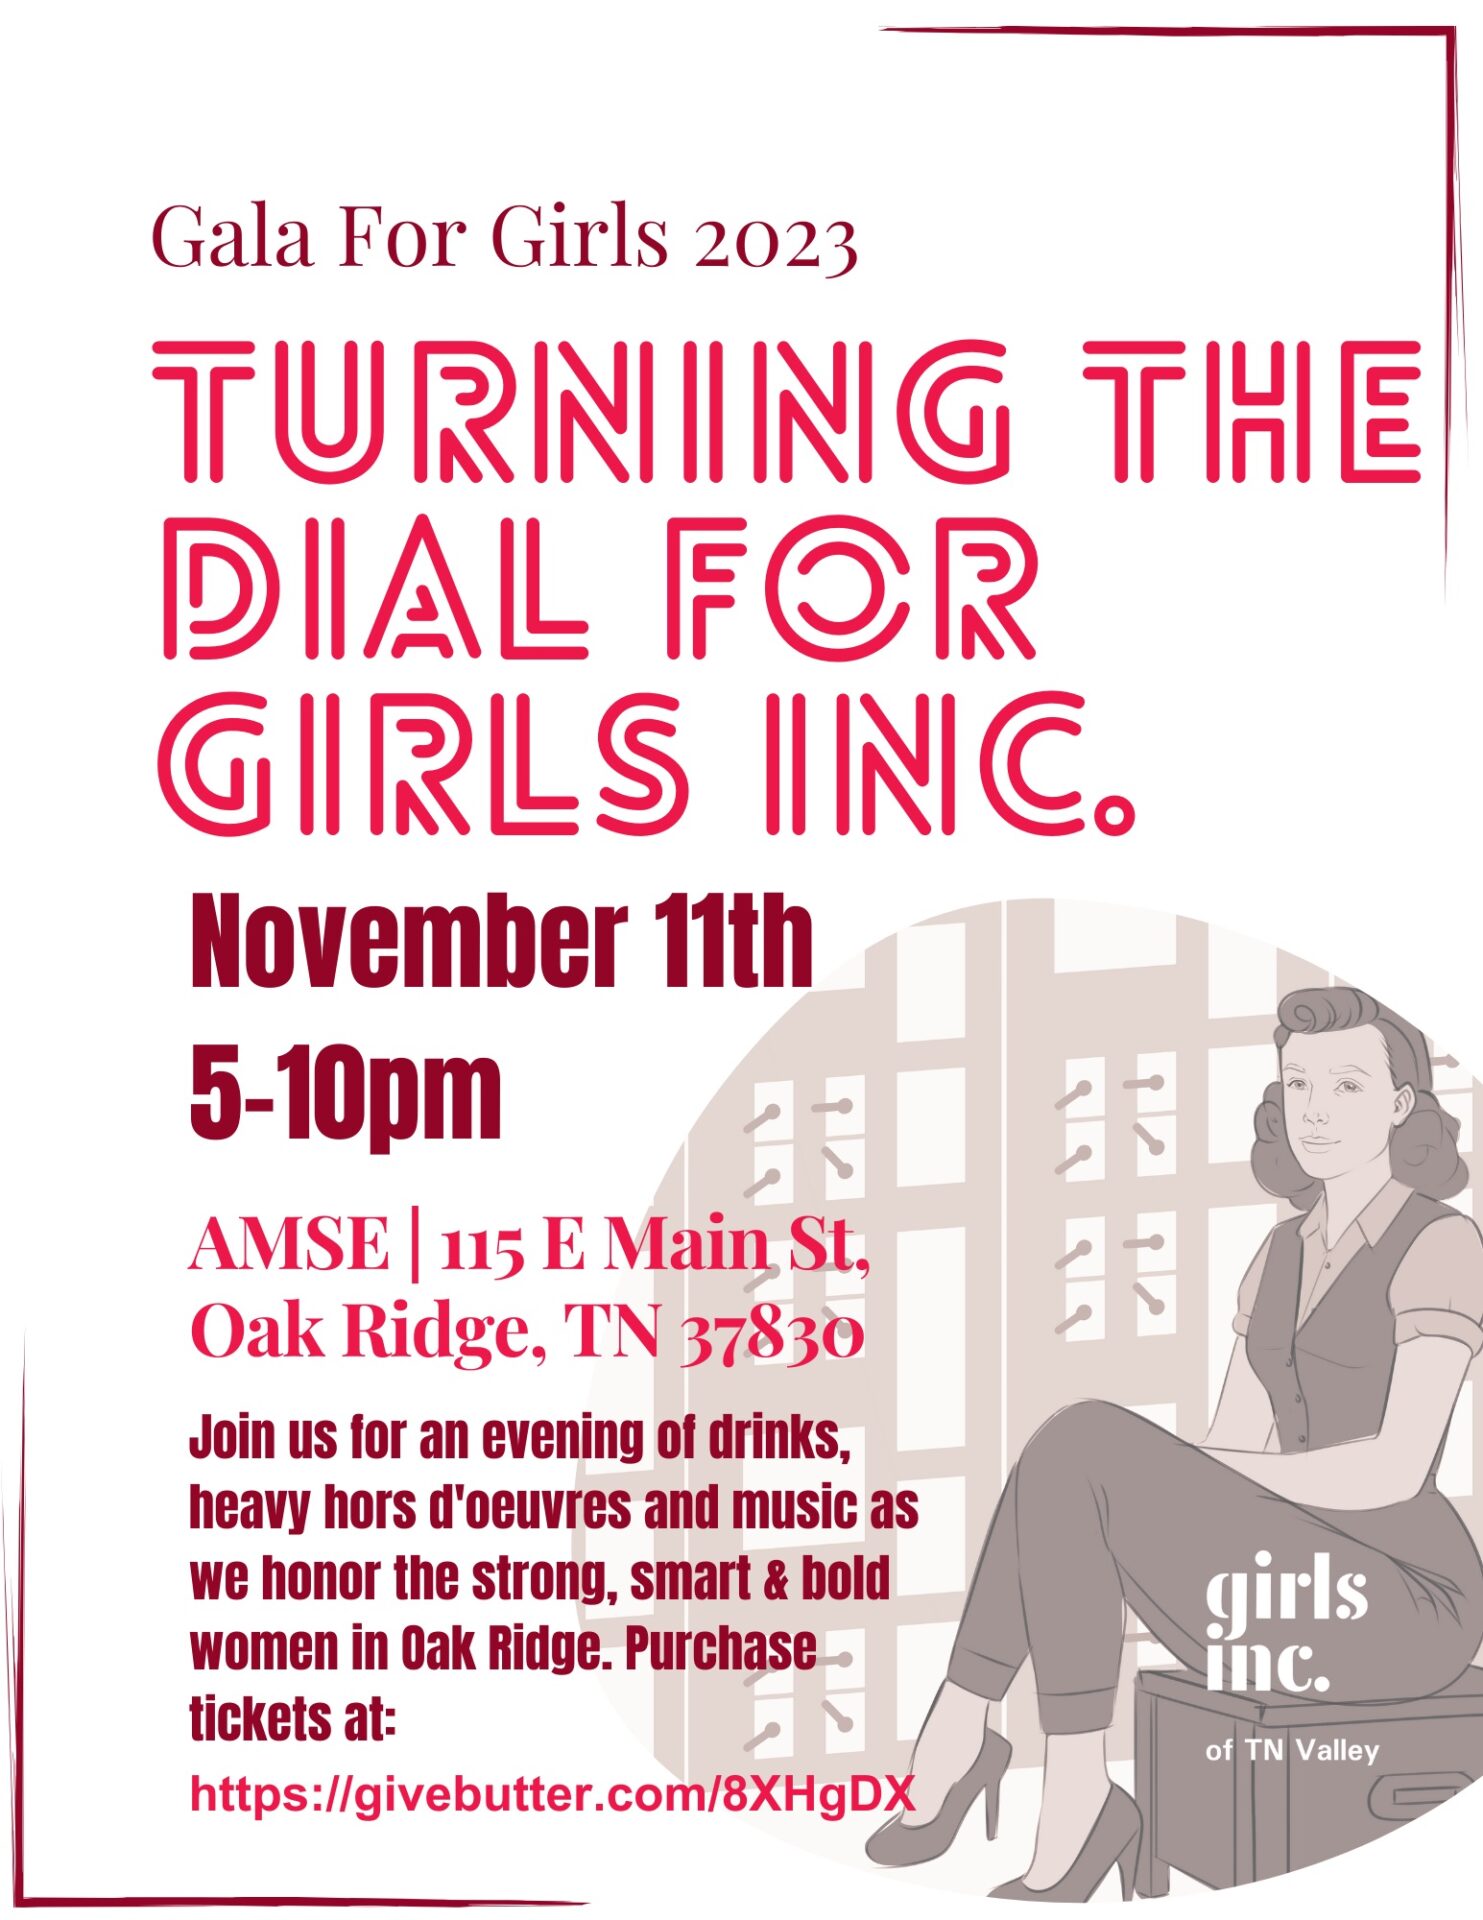 Gala for the Girls 2023 Turn the Dial for Girls Inc.